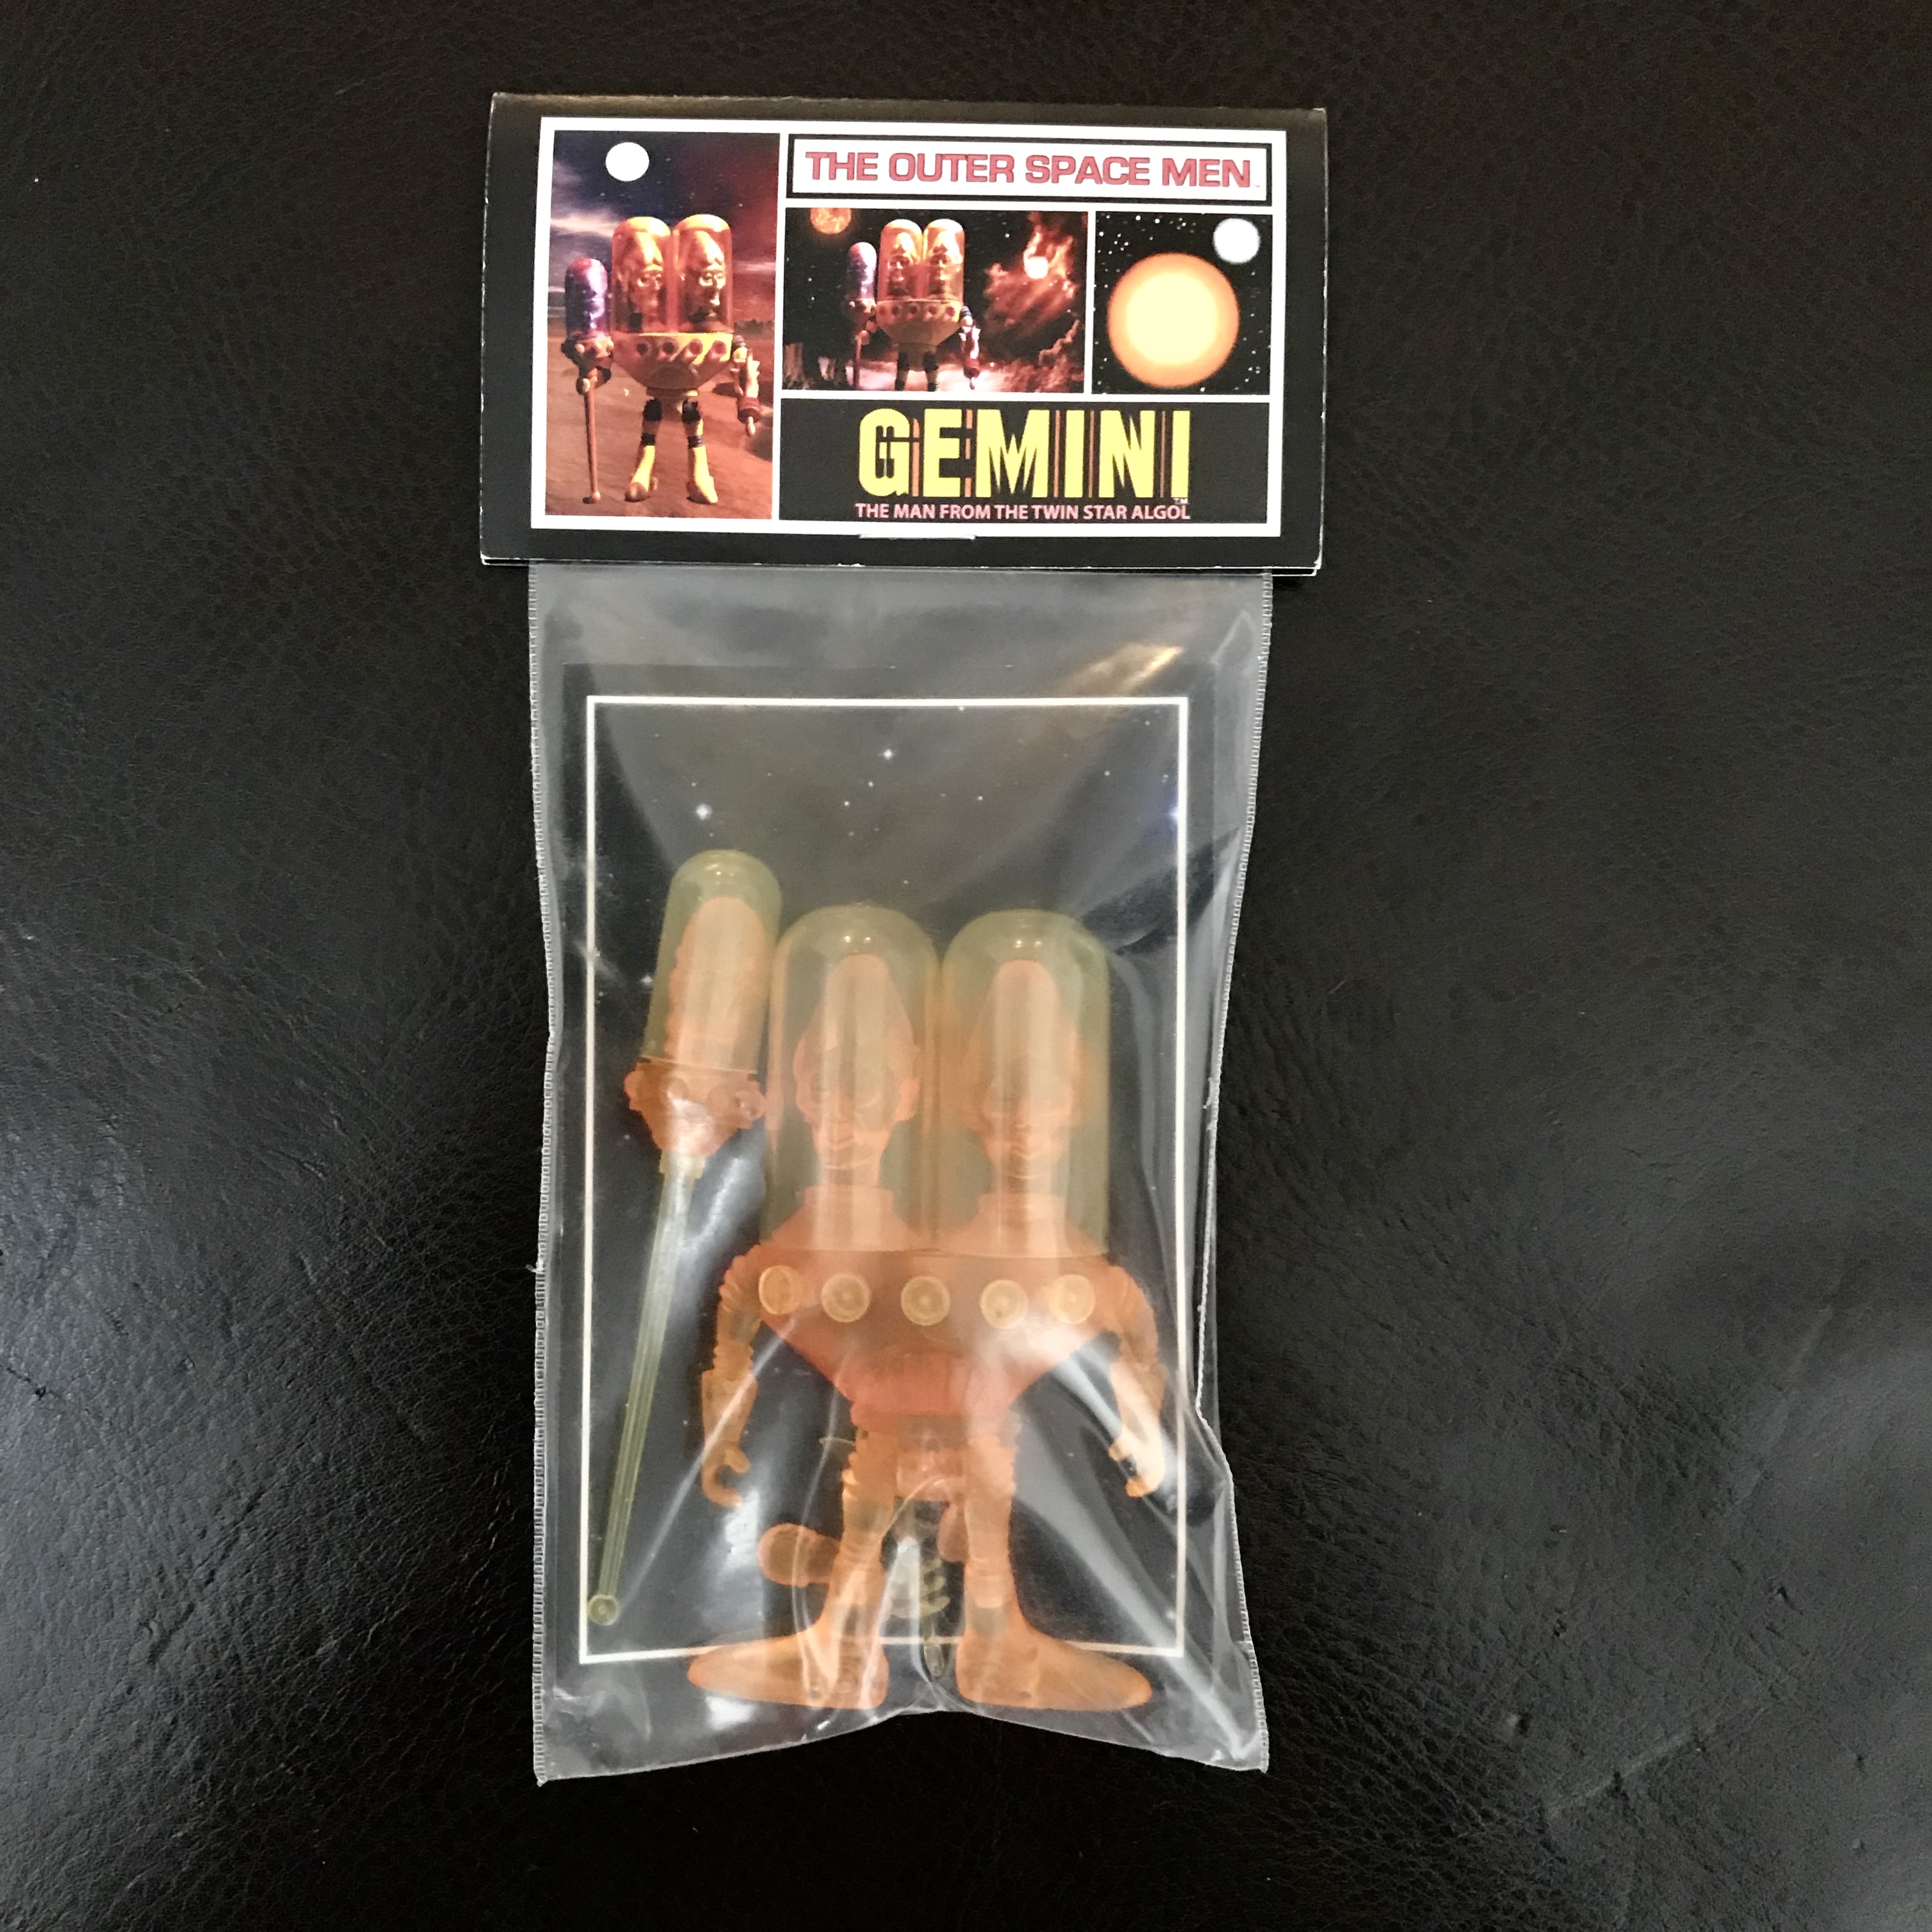 A package with a 2012 GEMINI EXCLUSIVE NEW YORK COMIC CON SEALED IN FACTORY BAG in it.